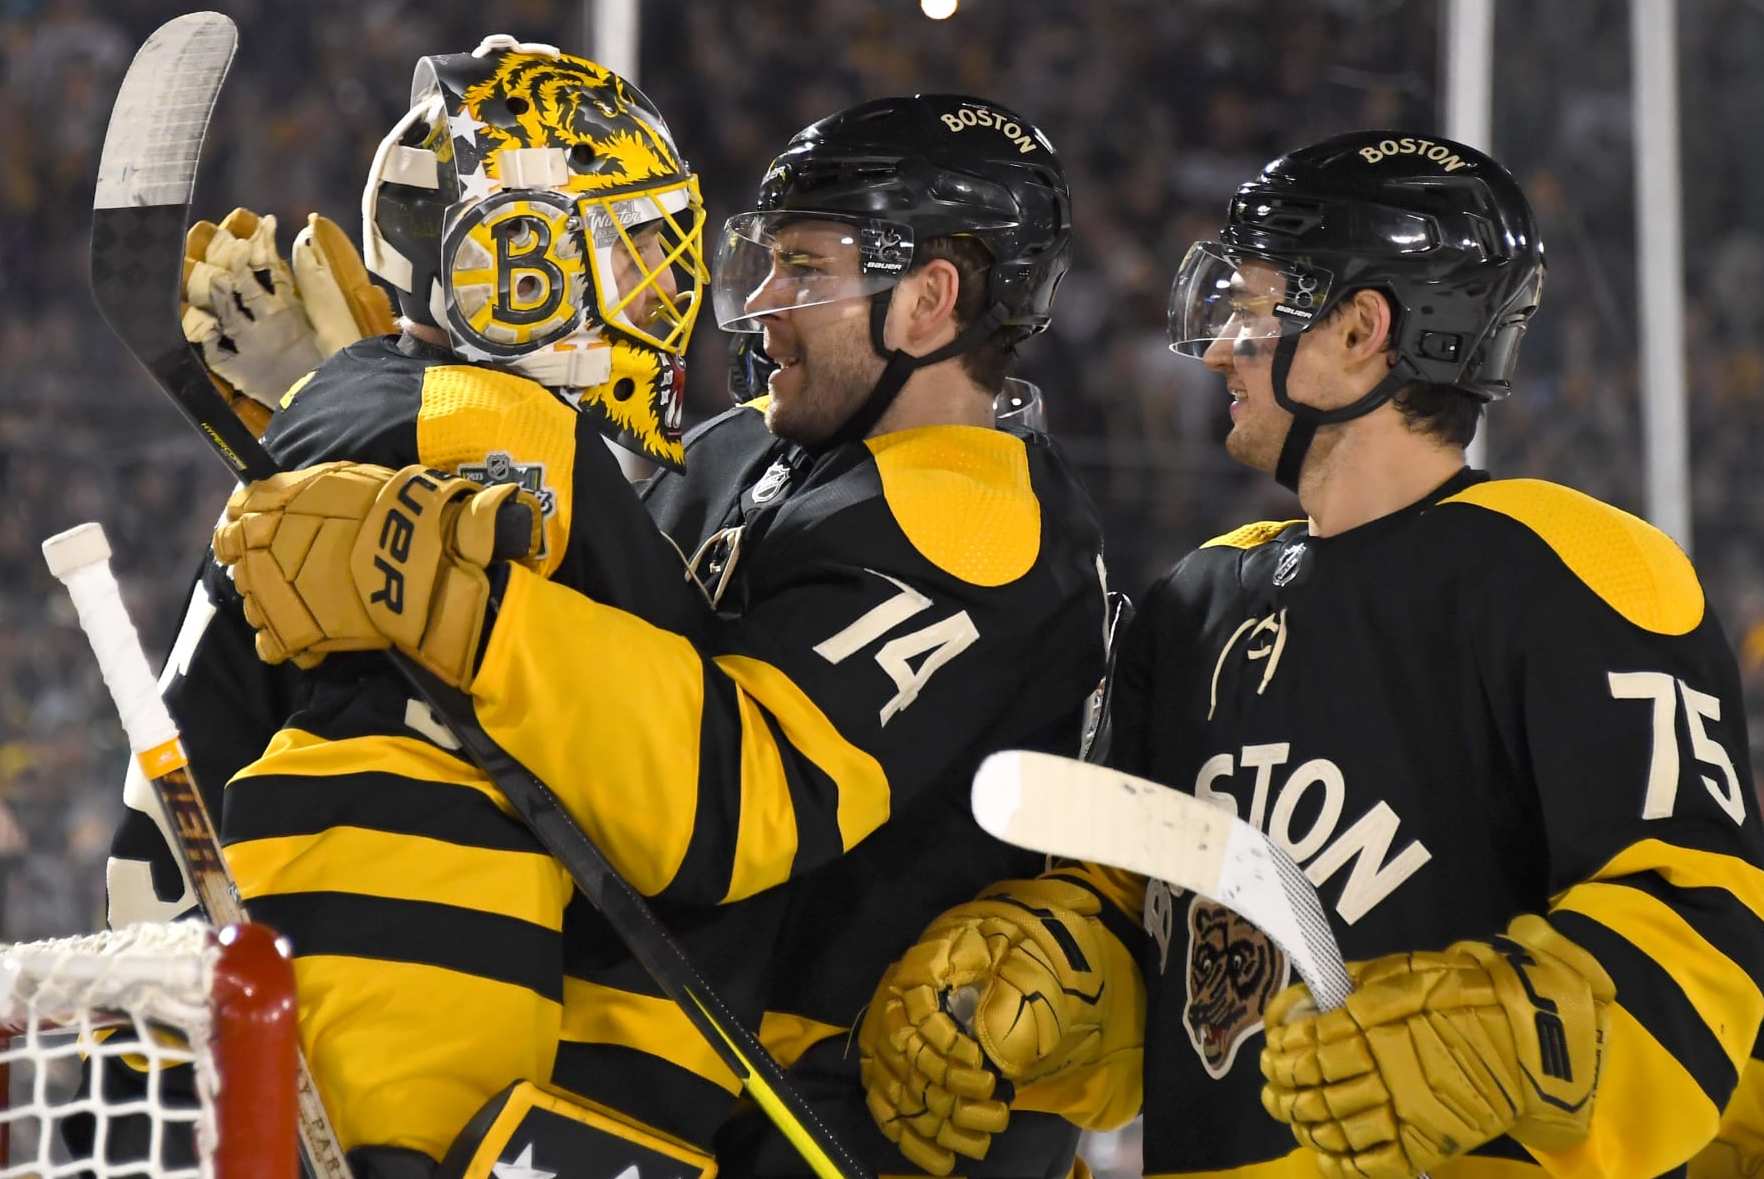 Crazy Scenes From the Winter Classic: Boston Bruins Win at Fenway